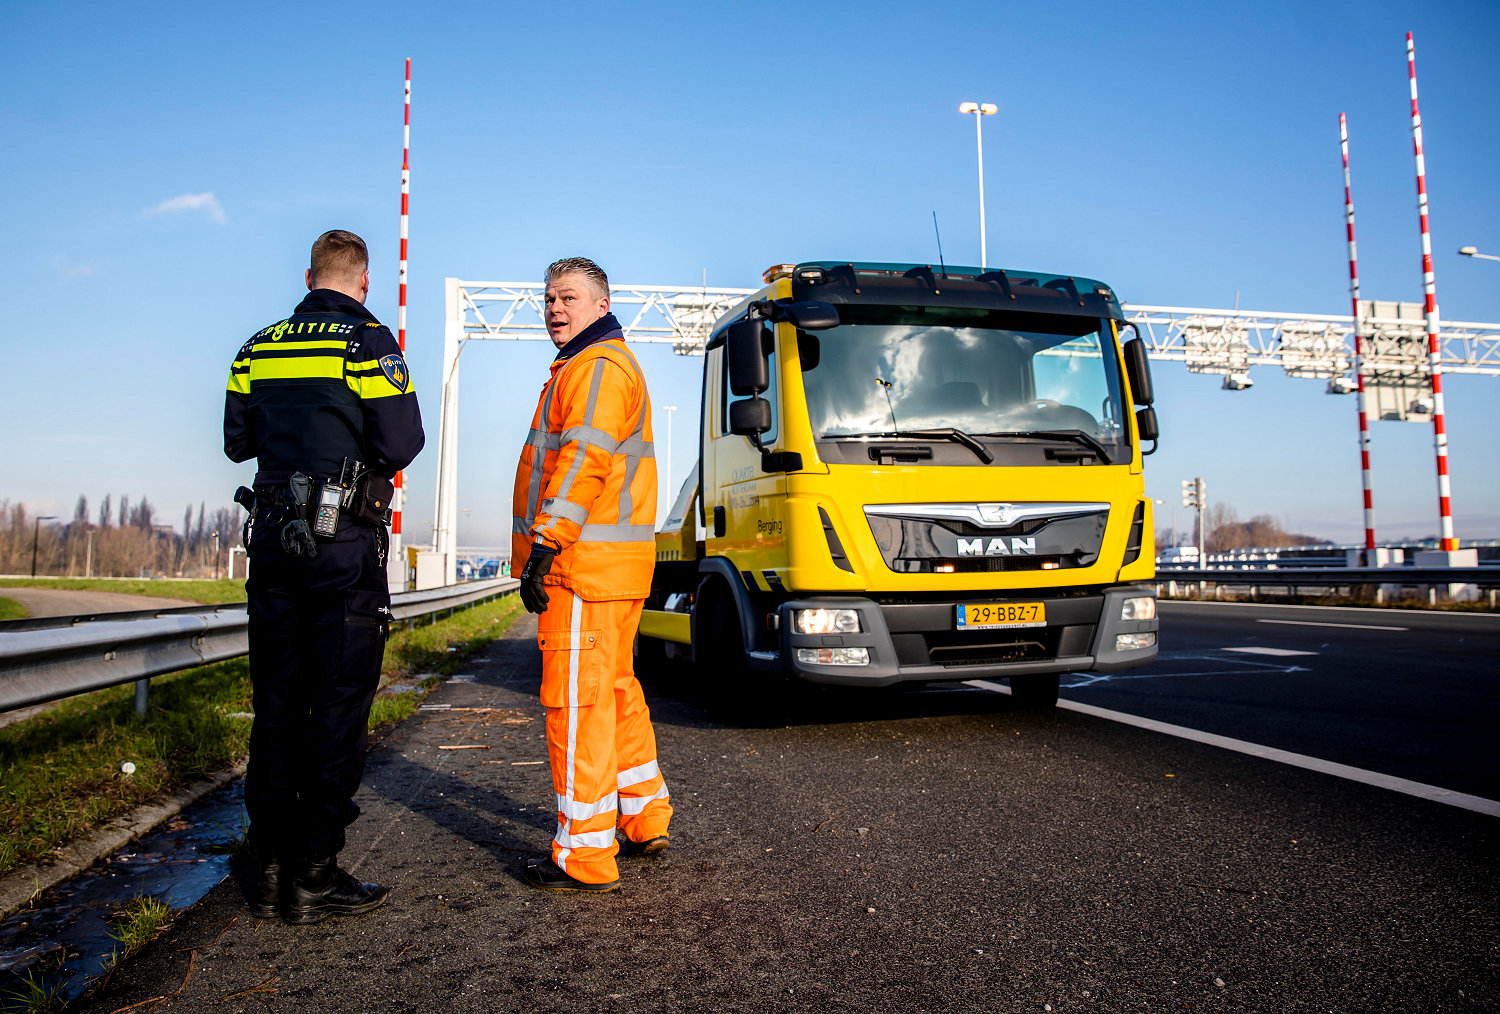 Frans Bul of Takel- en Bergingsbedrijf Quartel waiting for security in front of the entrance to the Benelux Tunnel on 8 February 2018. The police on site had accidentally driven past the incident. (photograph: Bart Maat)